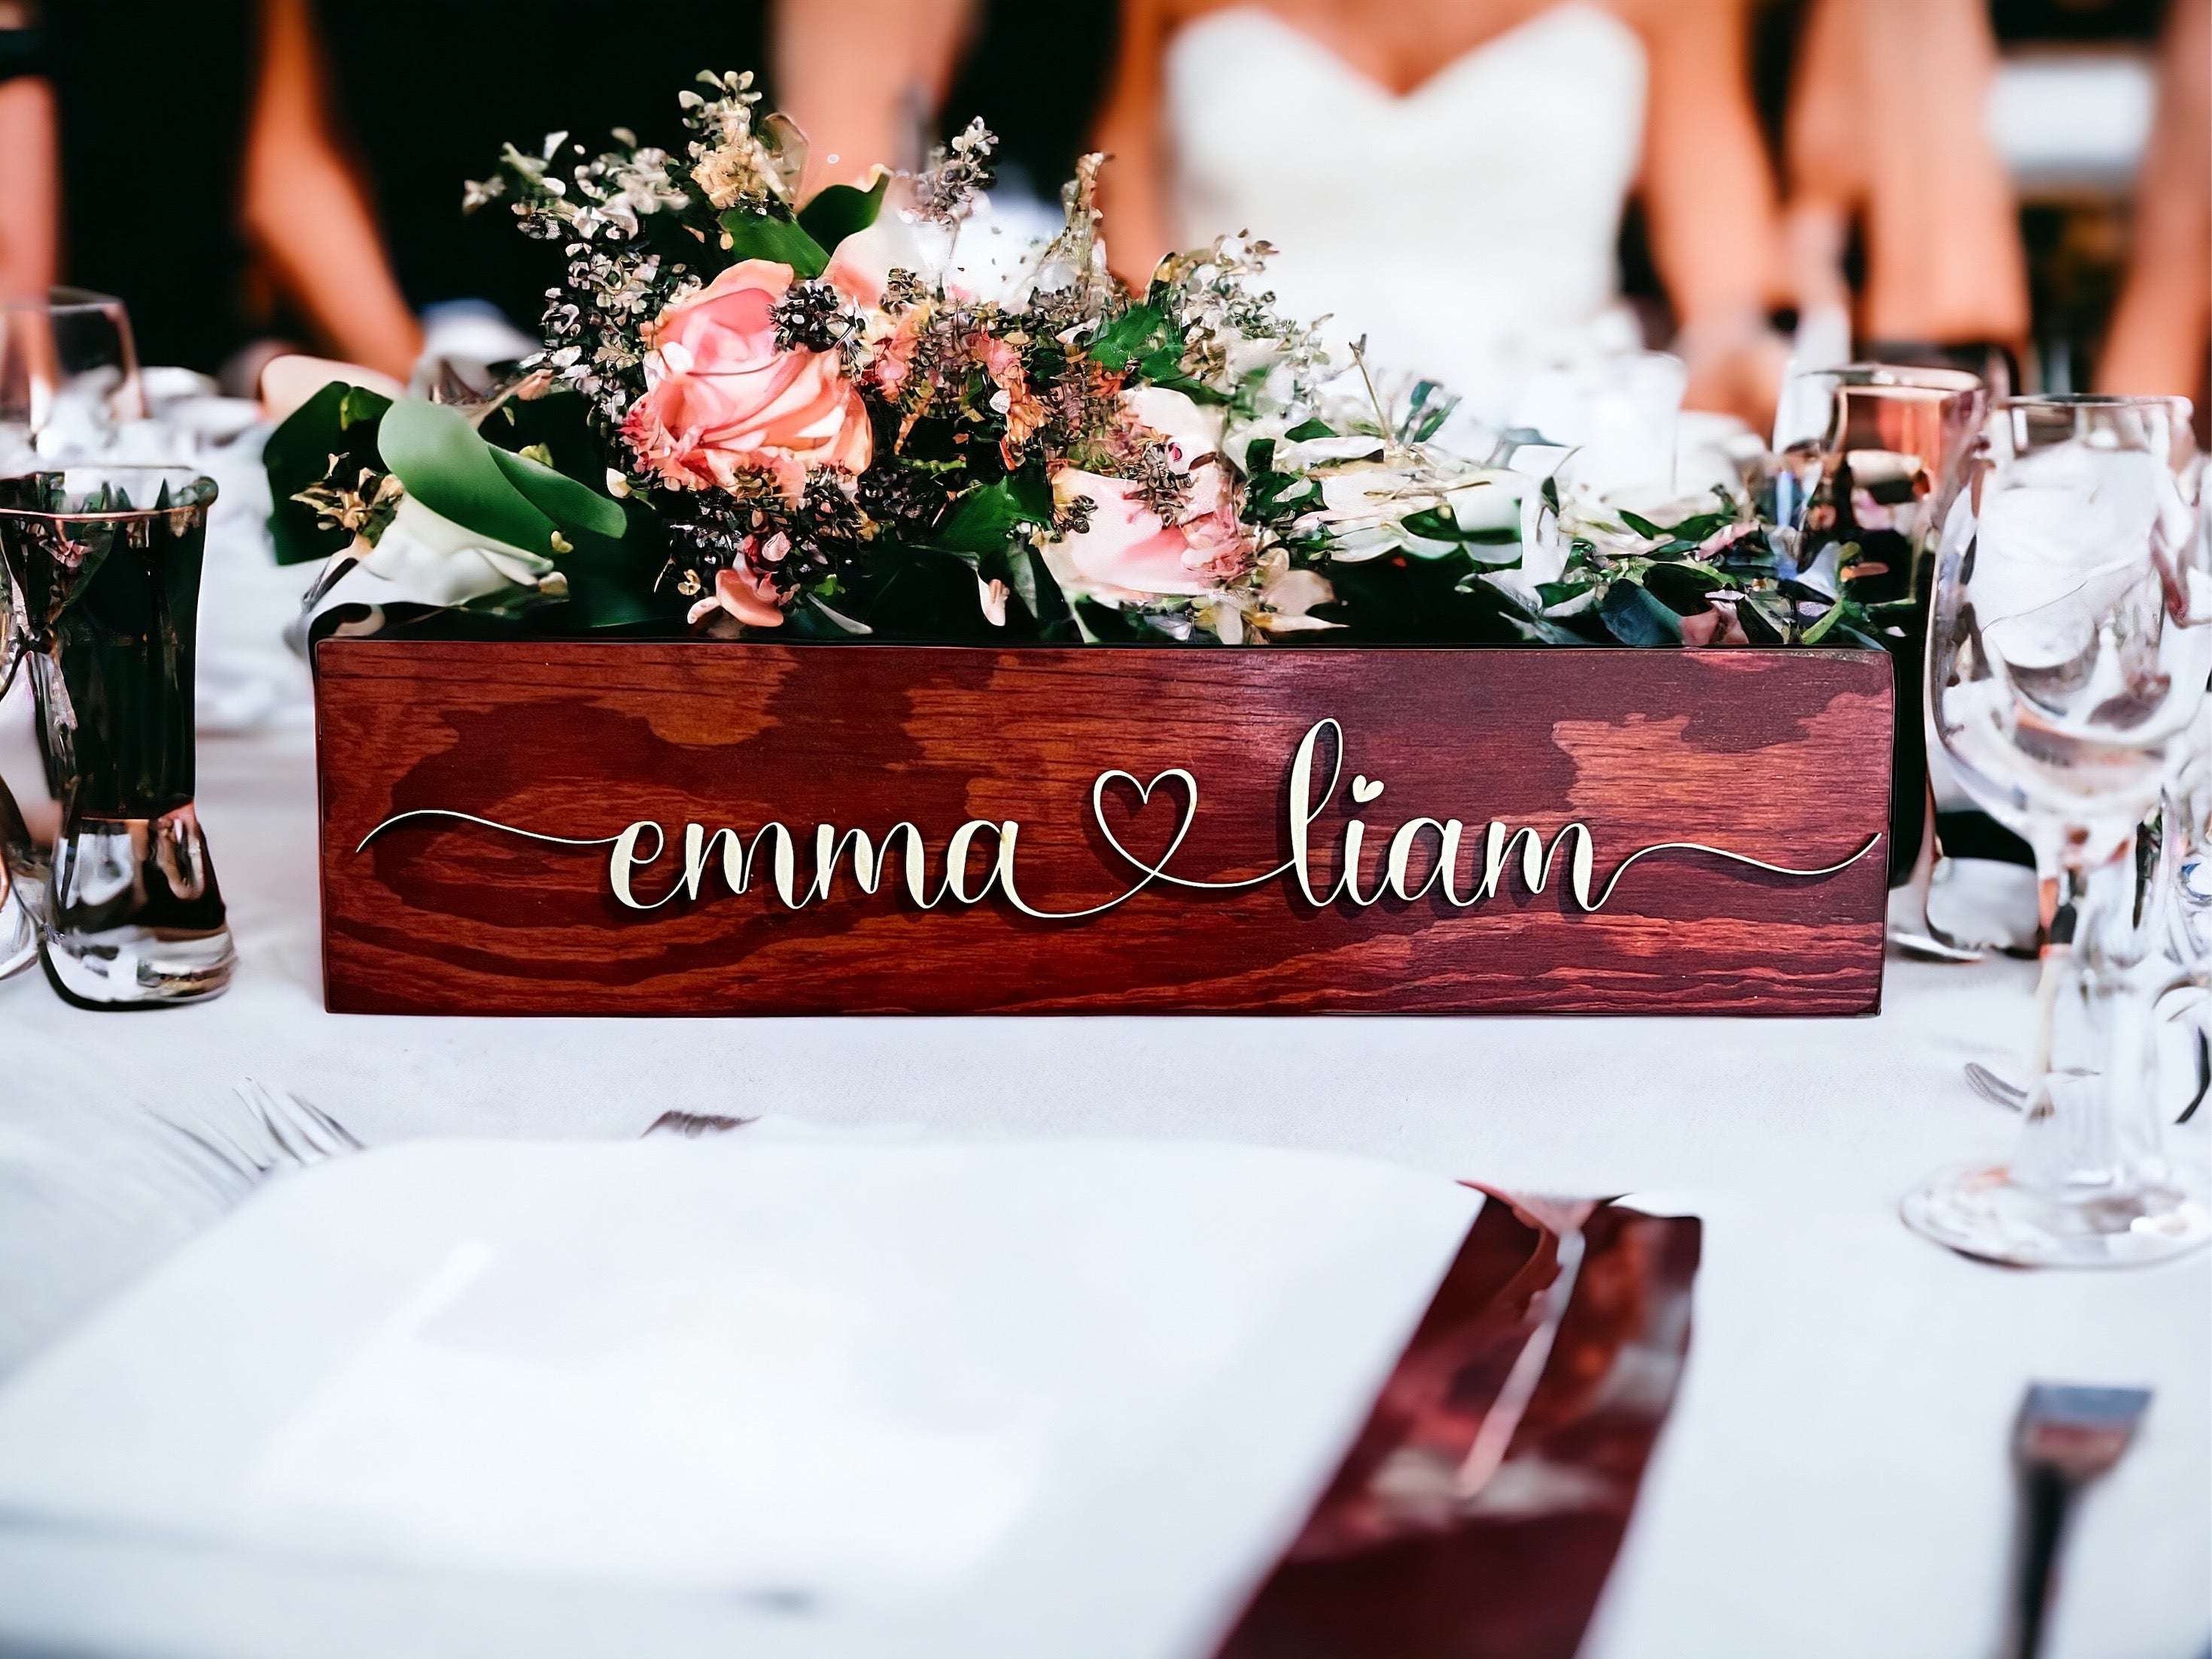 Elevate your space with a personalized couples gift – our enchanting sign with hearts adds a touch of romance to any setting